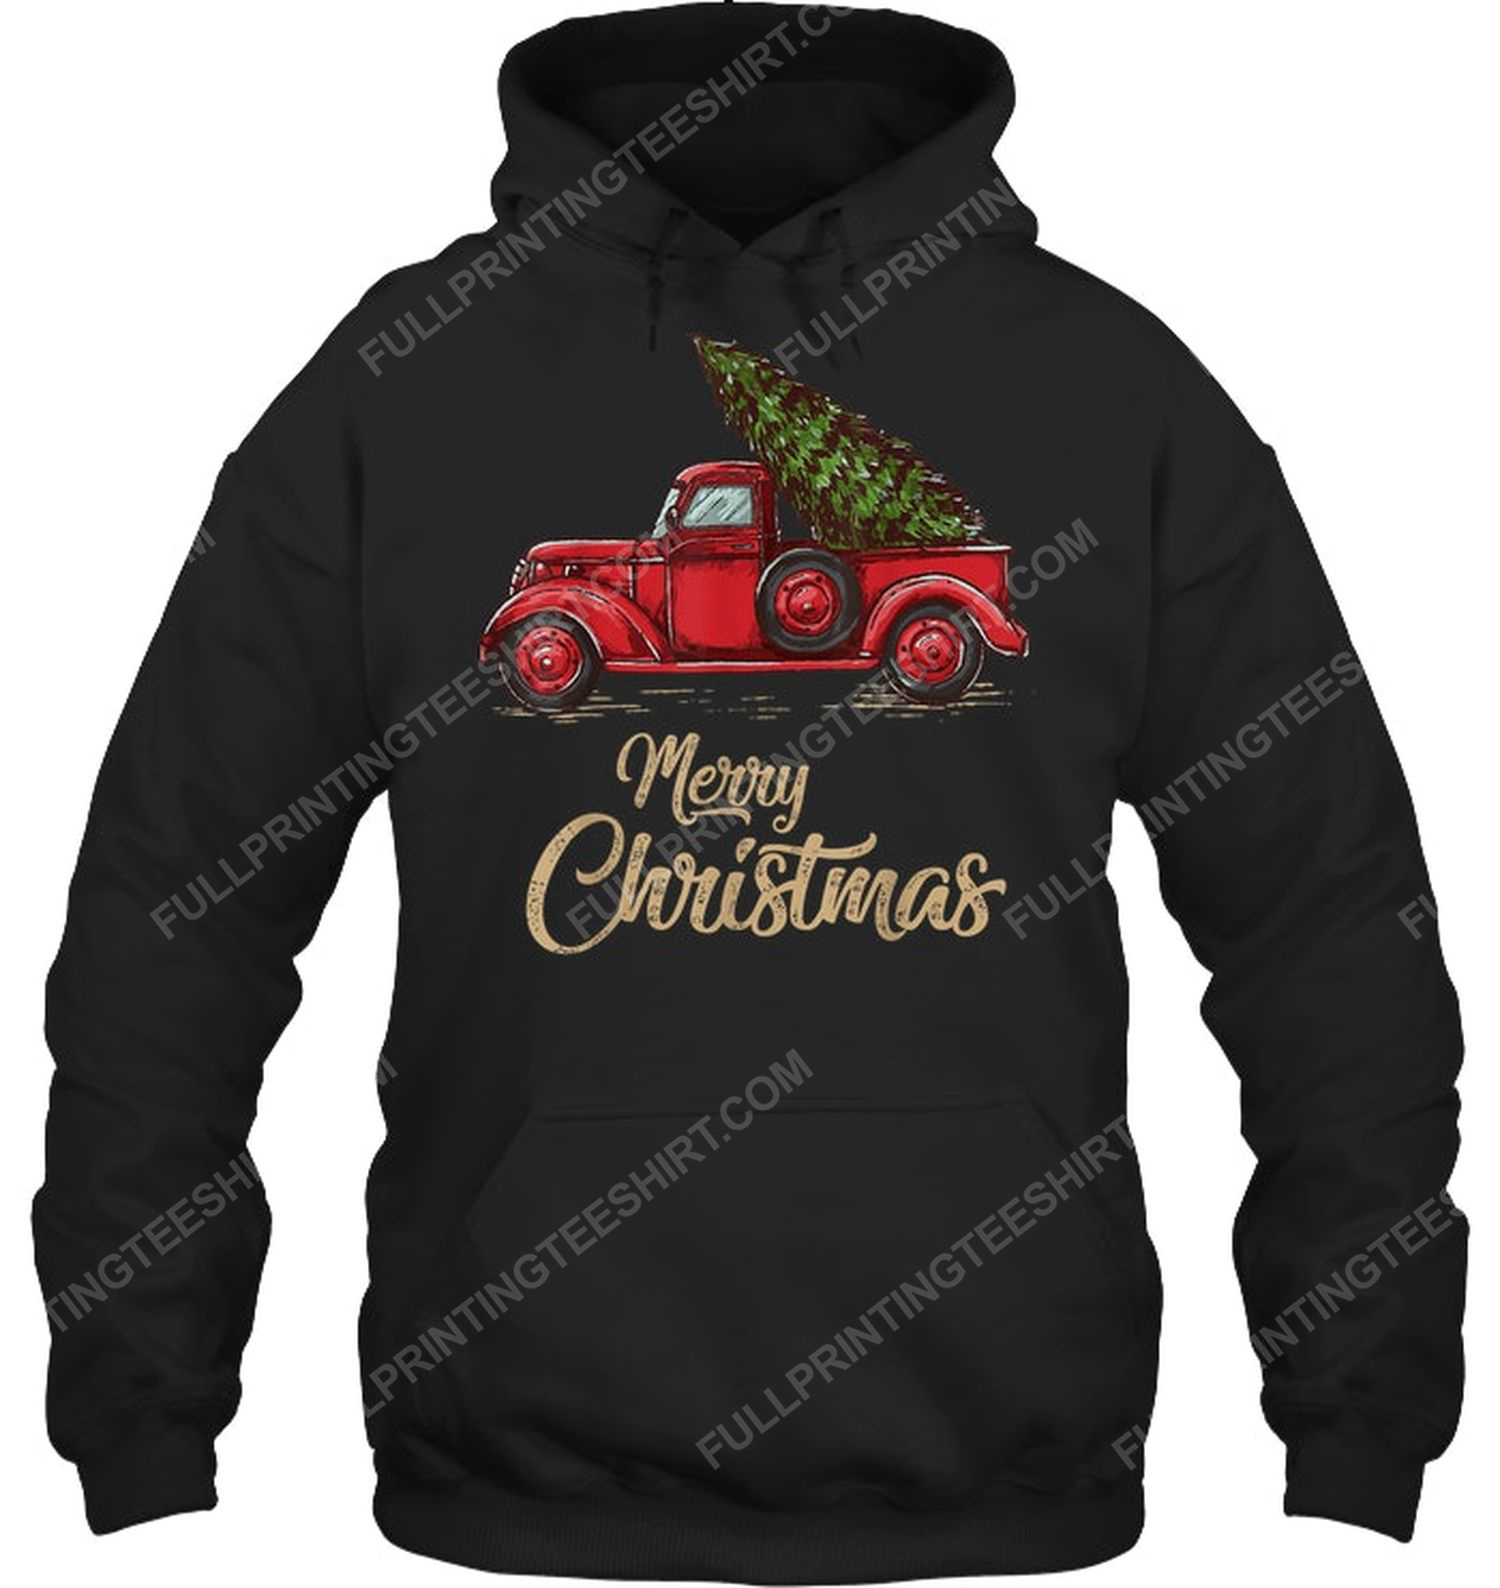 Vintage red truck with merry christmas tree hoodie